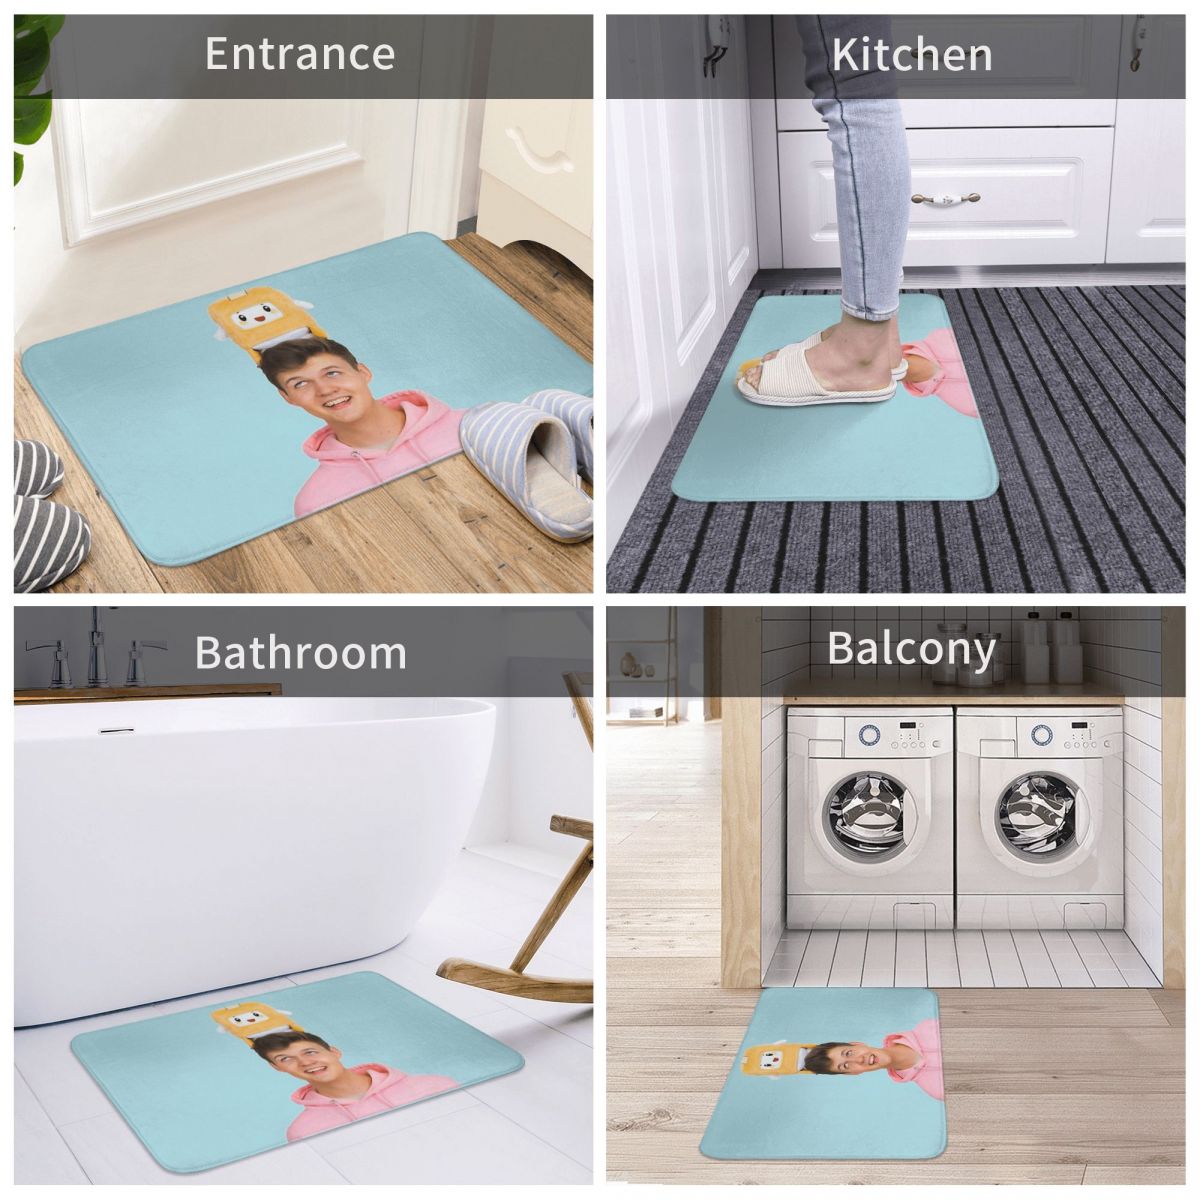 Lankybox Square Box Doll Stuffed Toy Non slip Doormat Square Doll Living Room Kitchen Mat Welcome 3 - Lankybox Plush